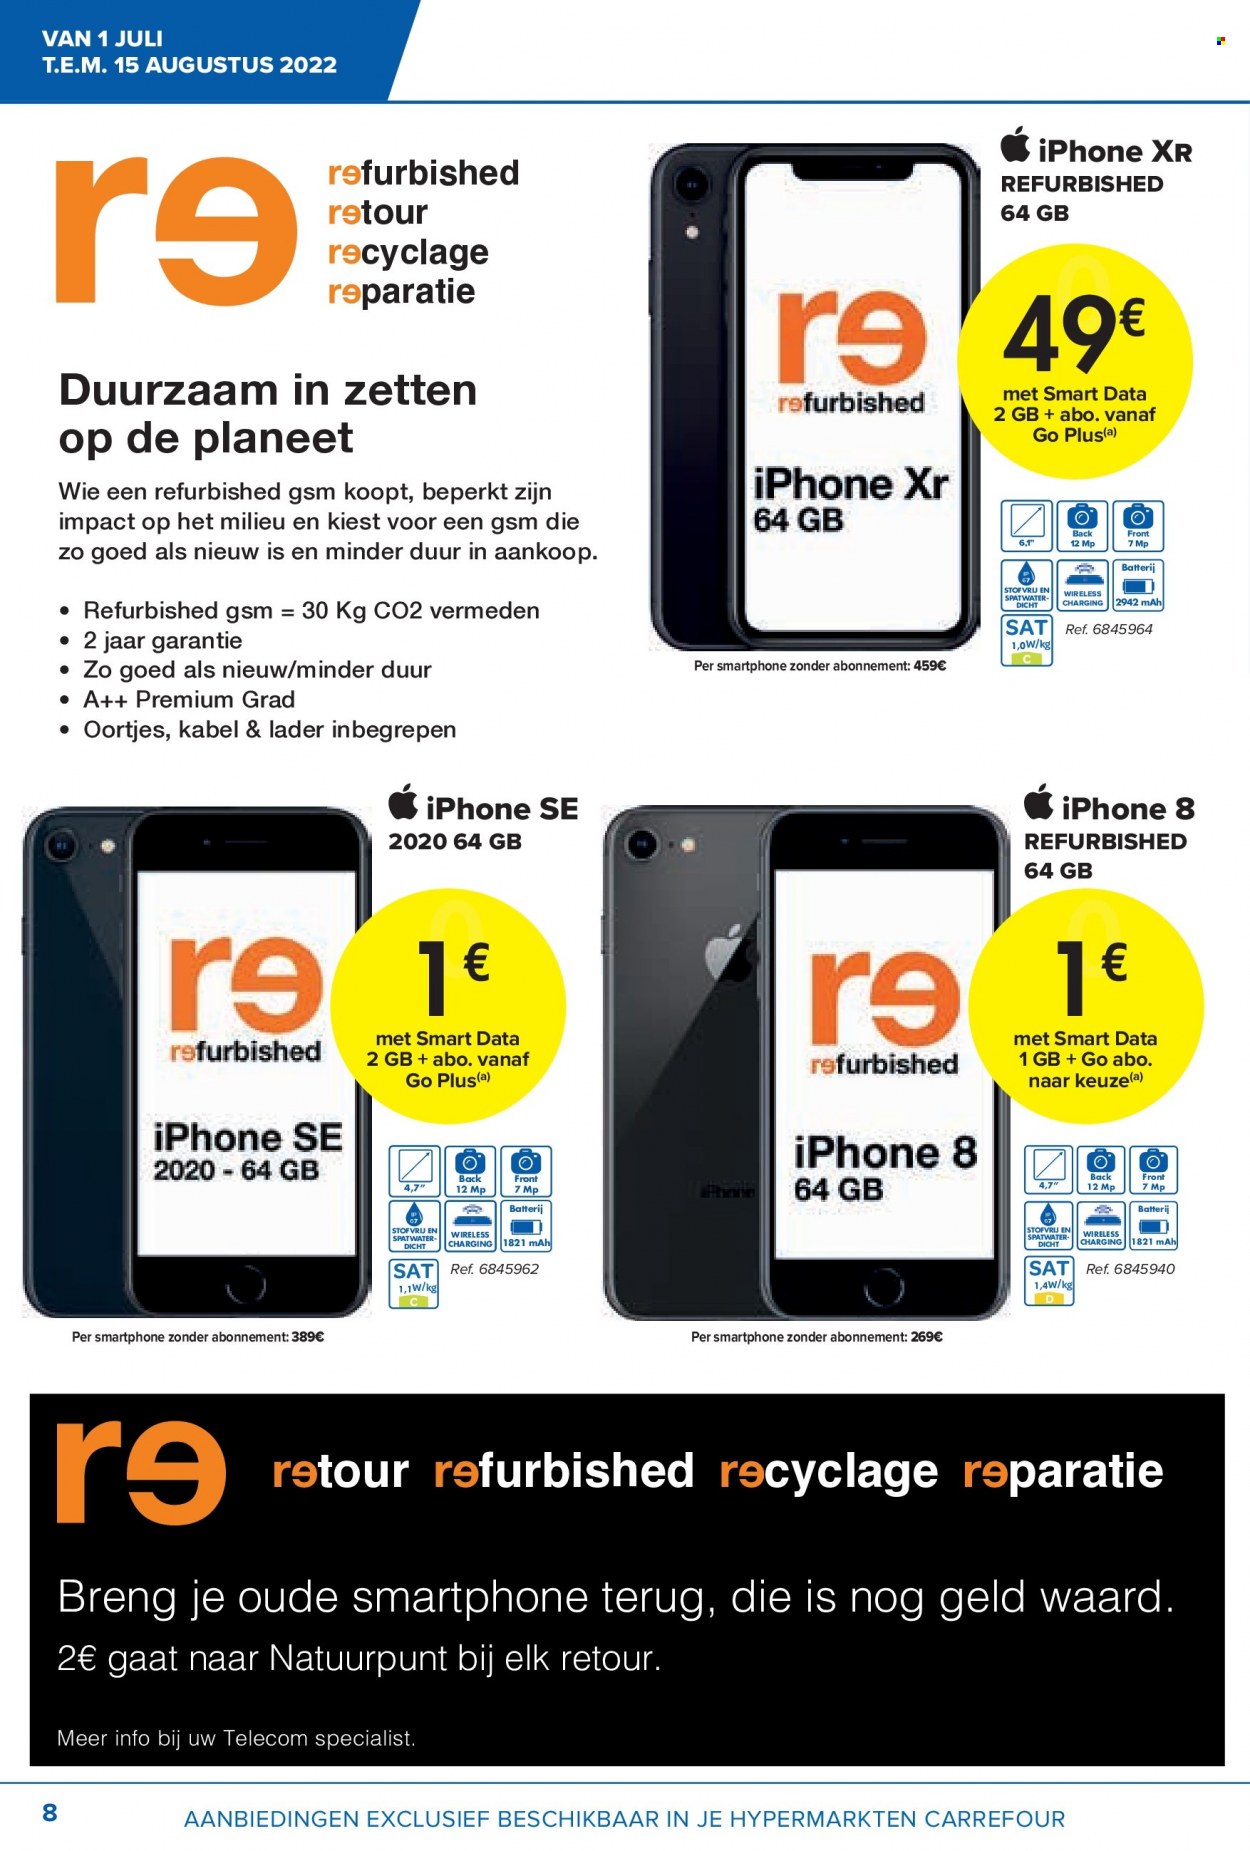 Catalogue Carrefour hypermarkt - 1.7.2022 - 15.8.2022. Page 8.